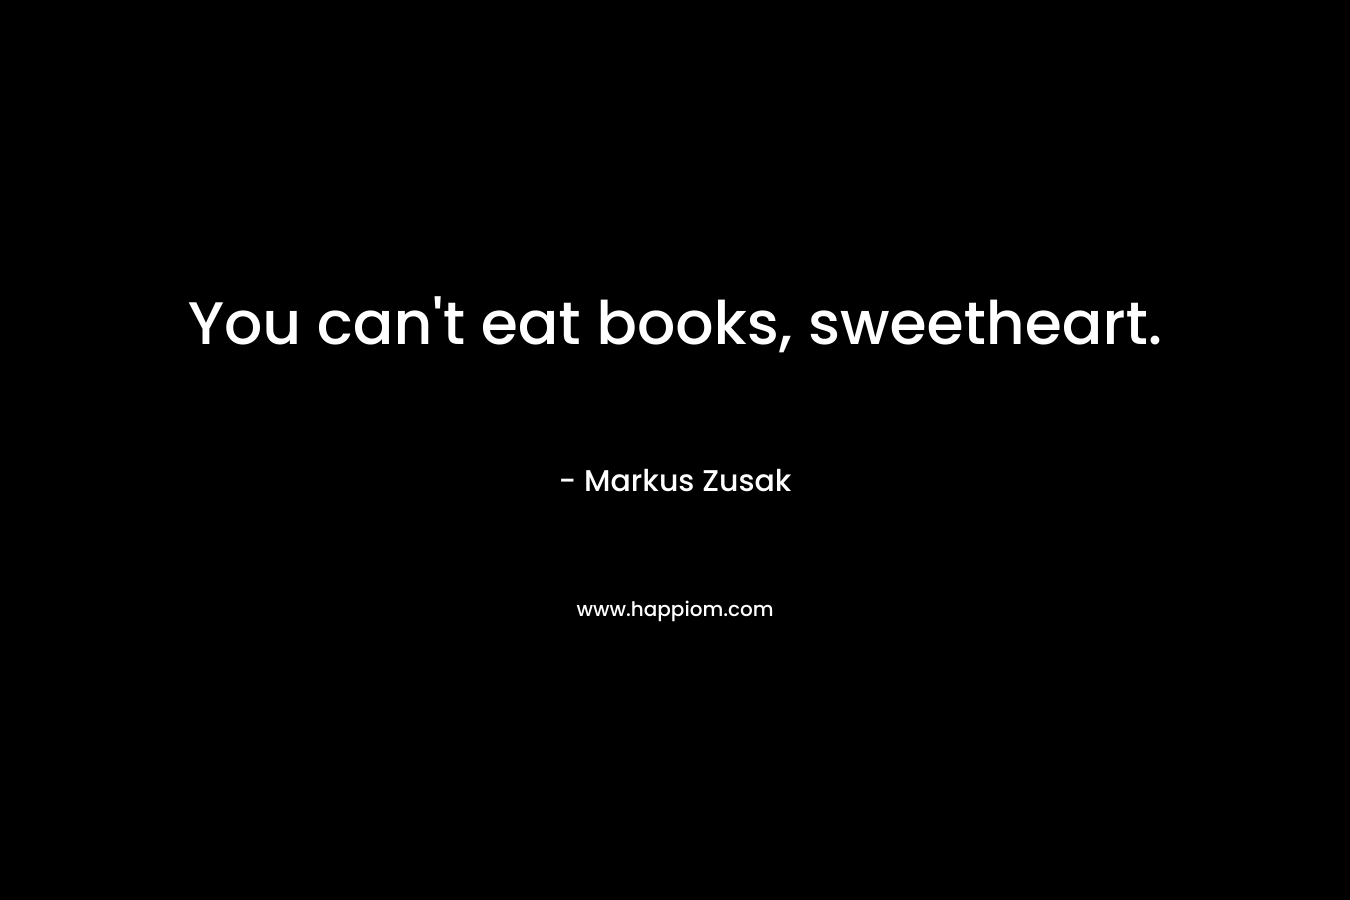 You can't eat books, sweetheart.